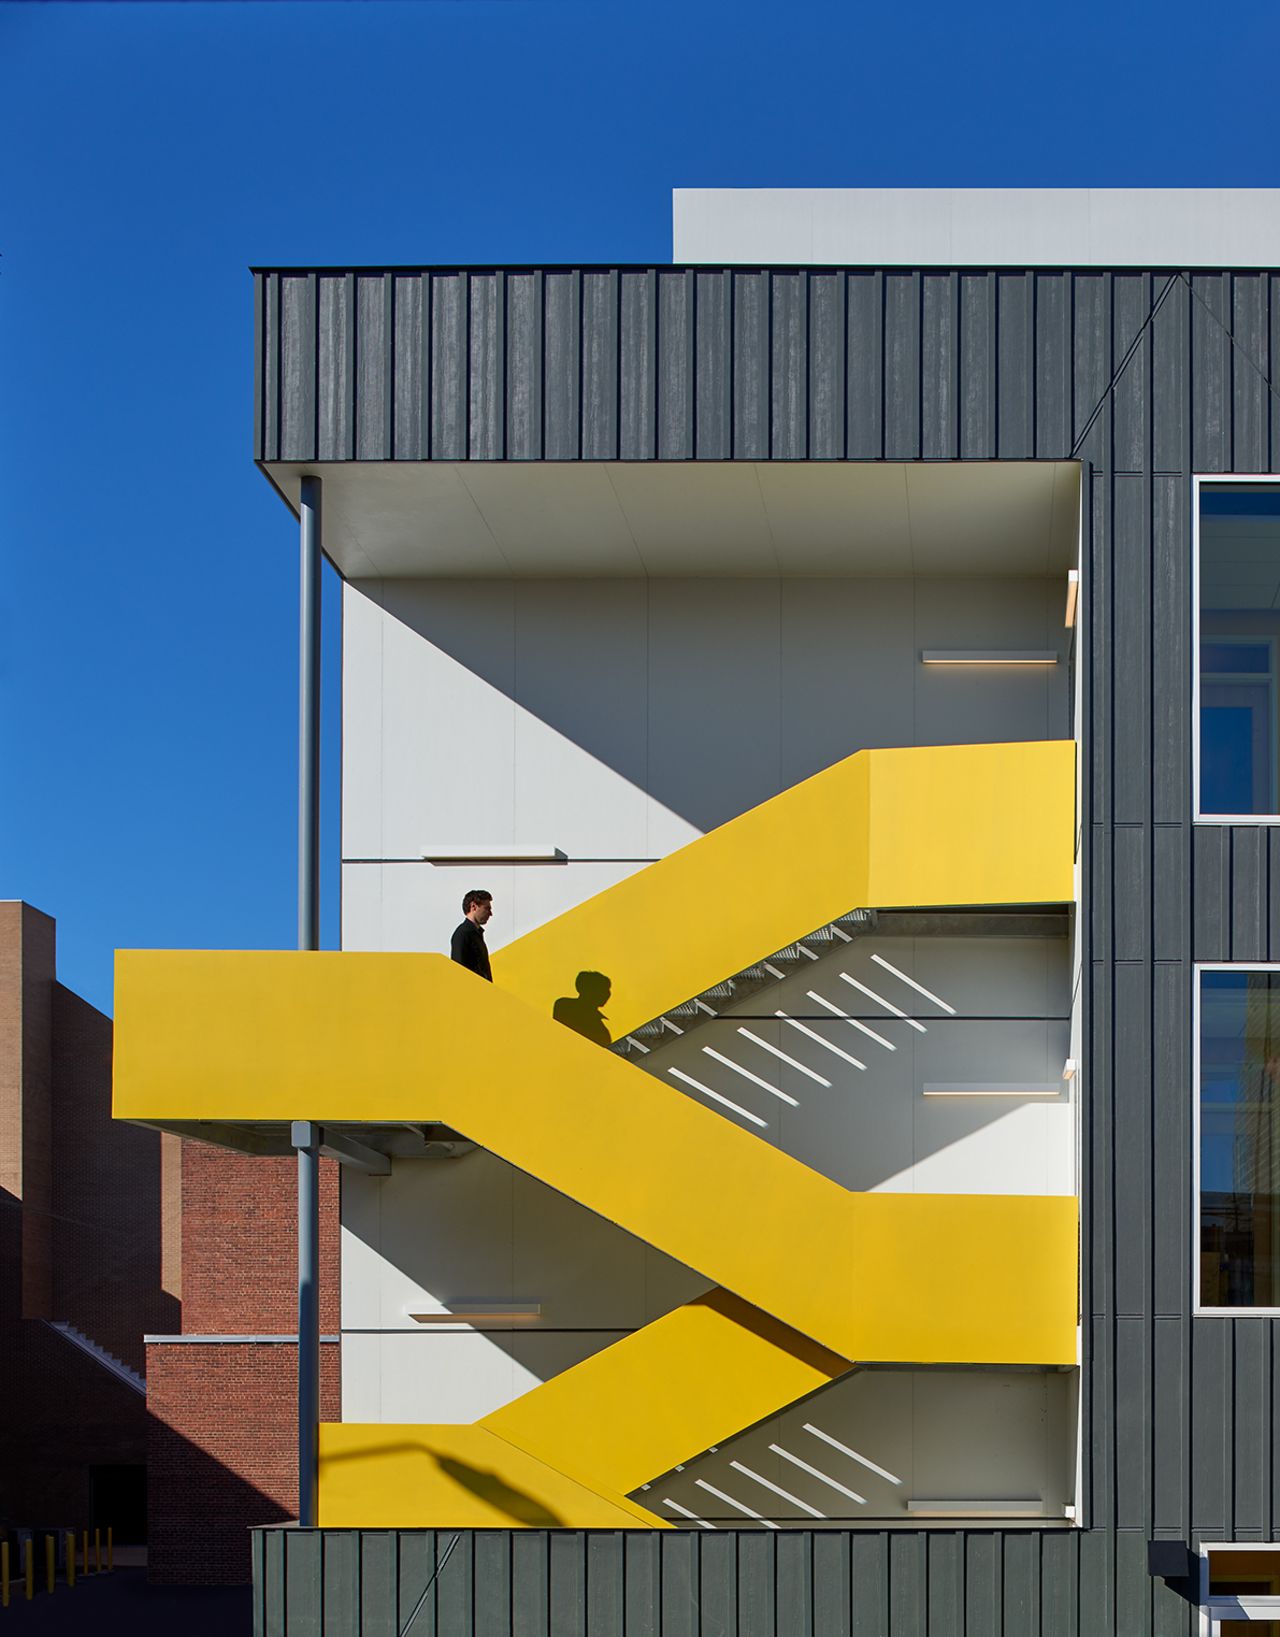 This bilingual, sustainability-focused public charter school was granted an Award of Excellence in the AIA's 2016 Education Design Facility Awards. <br /><br />"Within the older building, breakout nooks and cubbies are carved from the generous corridors and abandoned ventilation chases. The Pre-K annex facade is designed to be deferential to the historic school," said the AIA. <br />